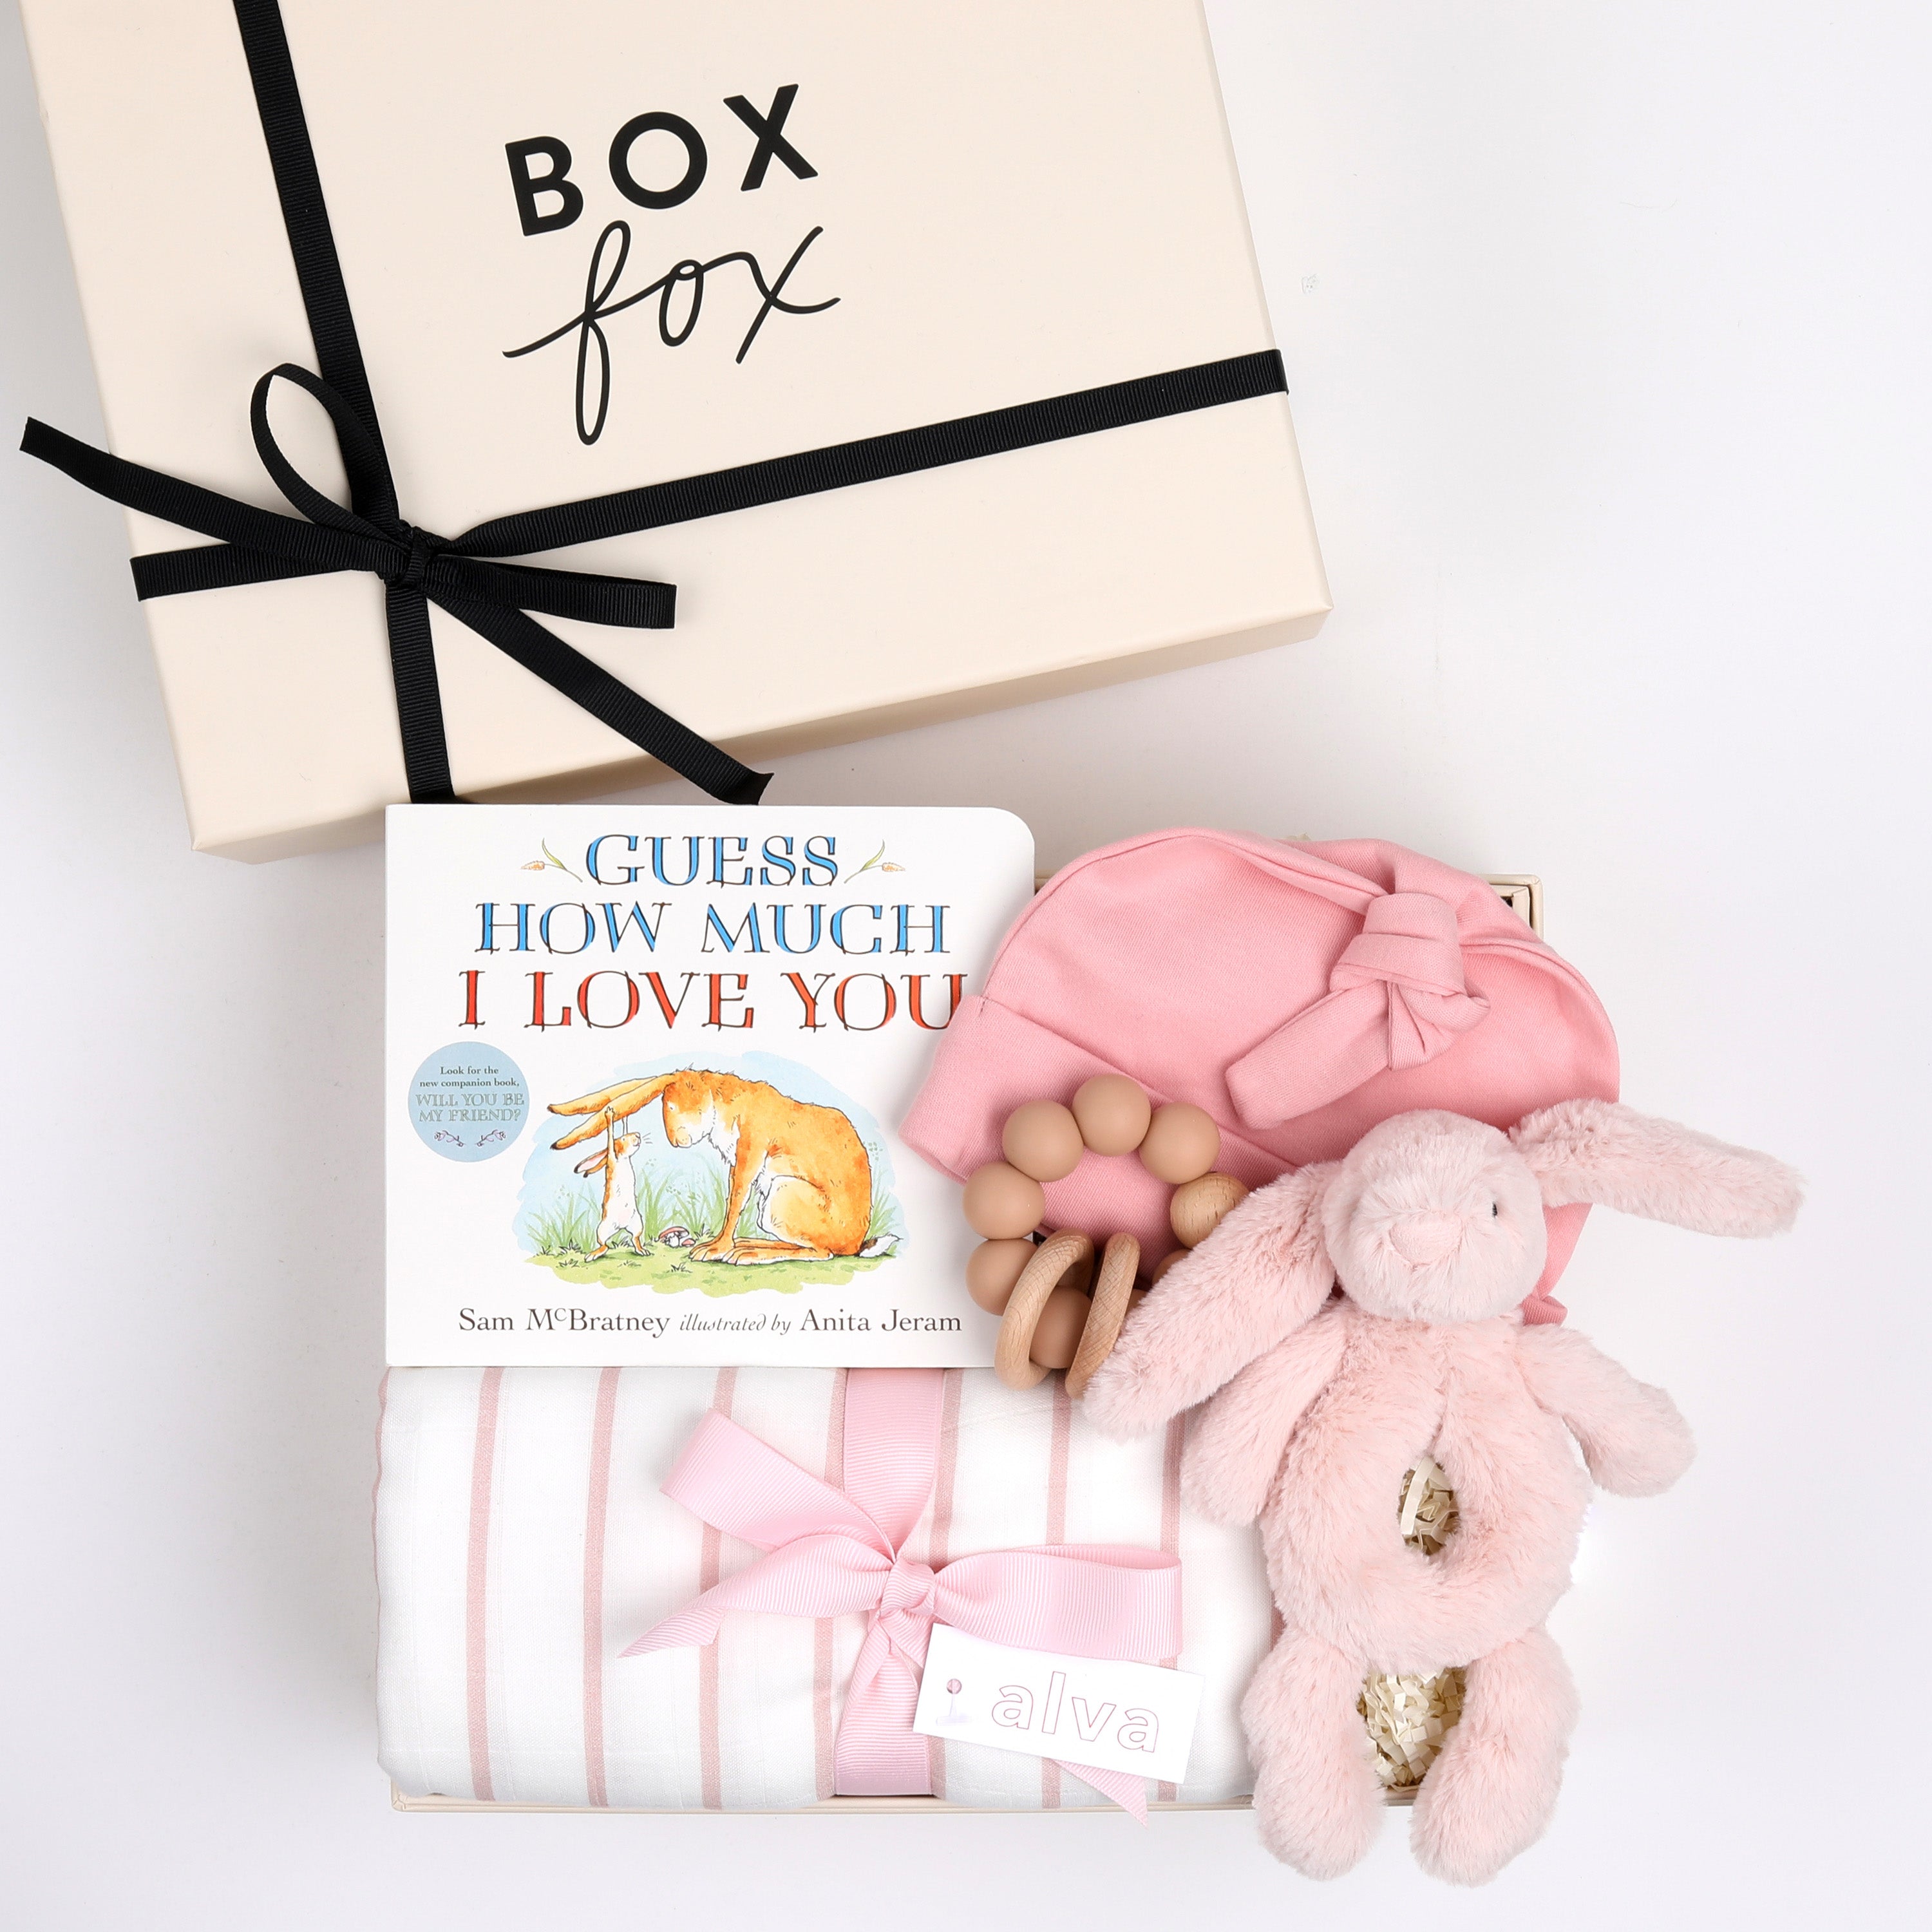 BOXFOX creme gift box next to open box containing a book, swaddle, teether, baby beanie and bunny rattle.